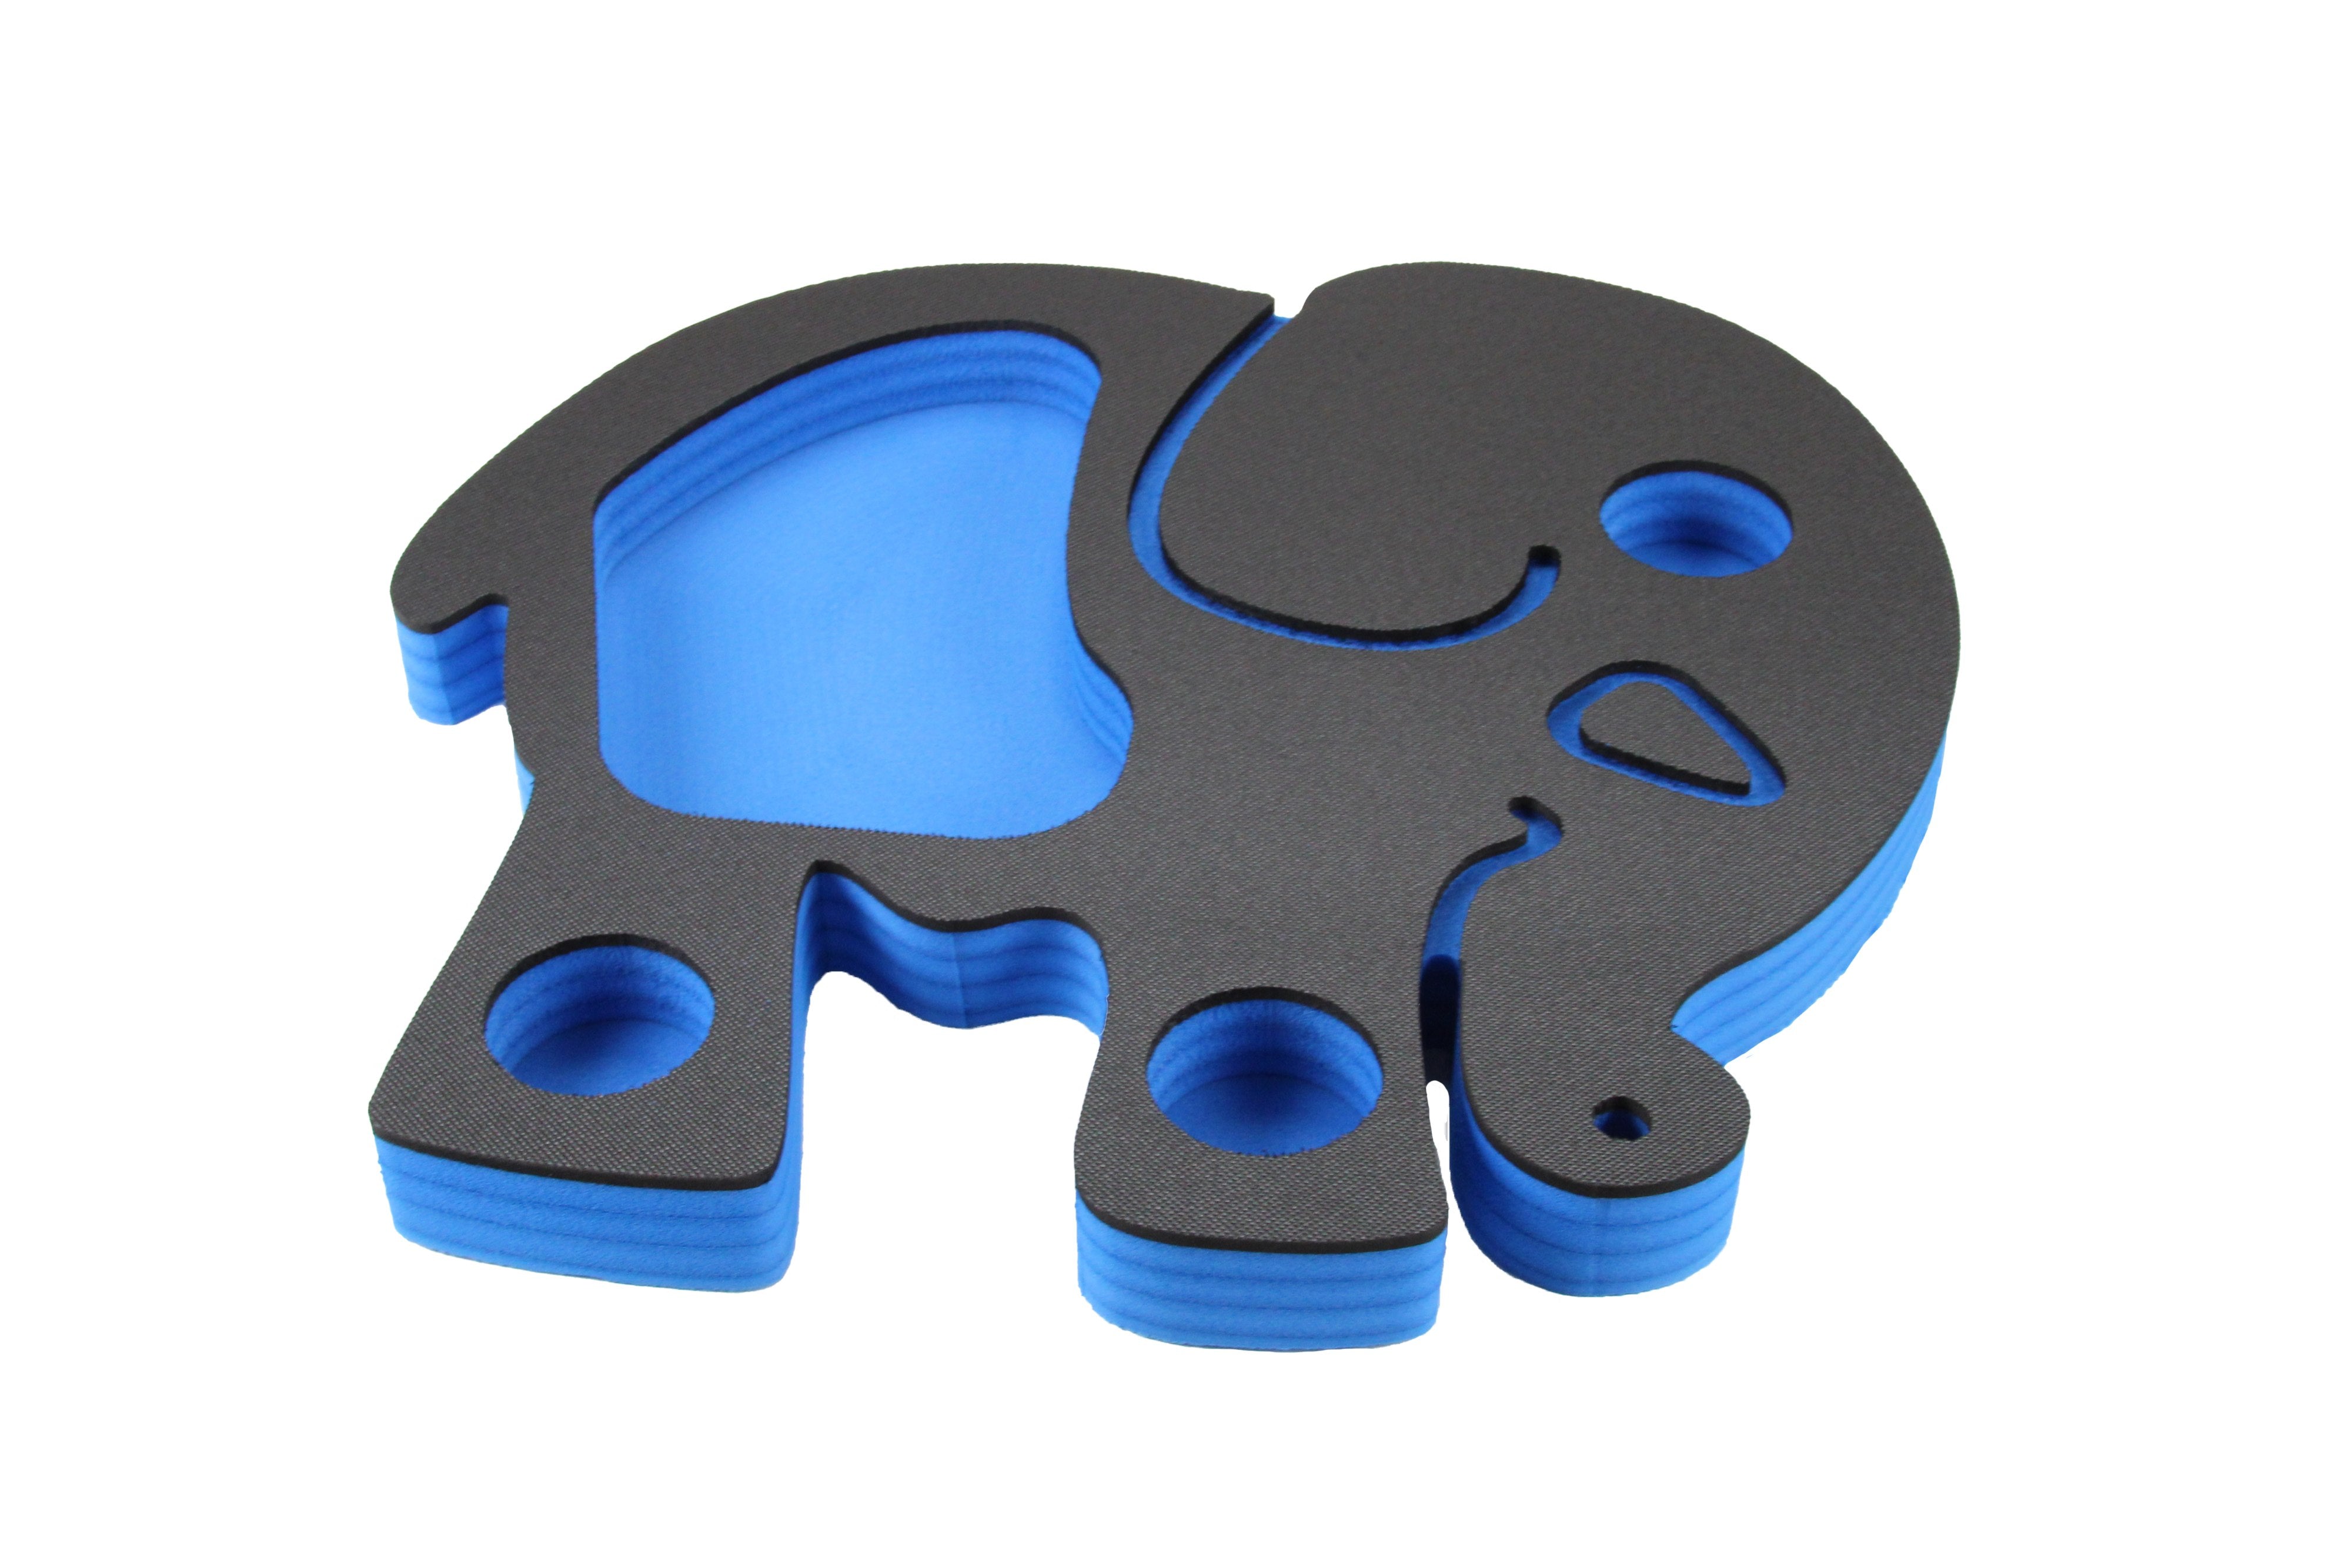 Elephant Shaped Drink Holder Refreshment Table Tray PoolBeach Party Float Lounge Durable Foam 4 Compartment UV Resistant Cup Holders 23.5 Inches